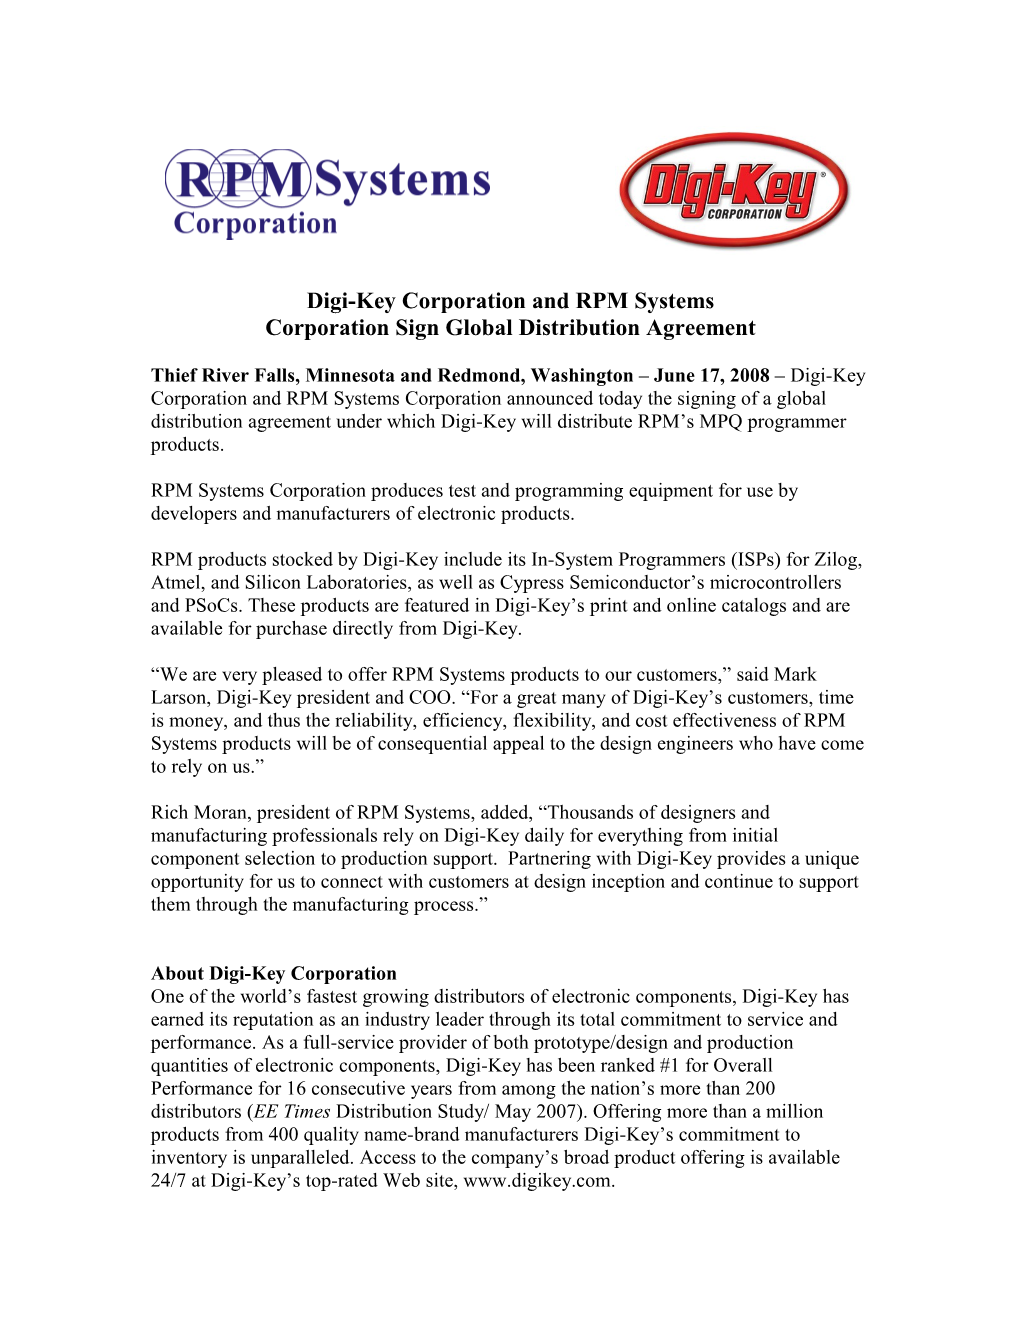 About RPM Systems Corporation